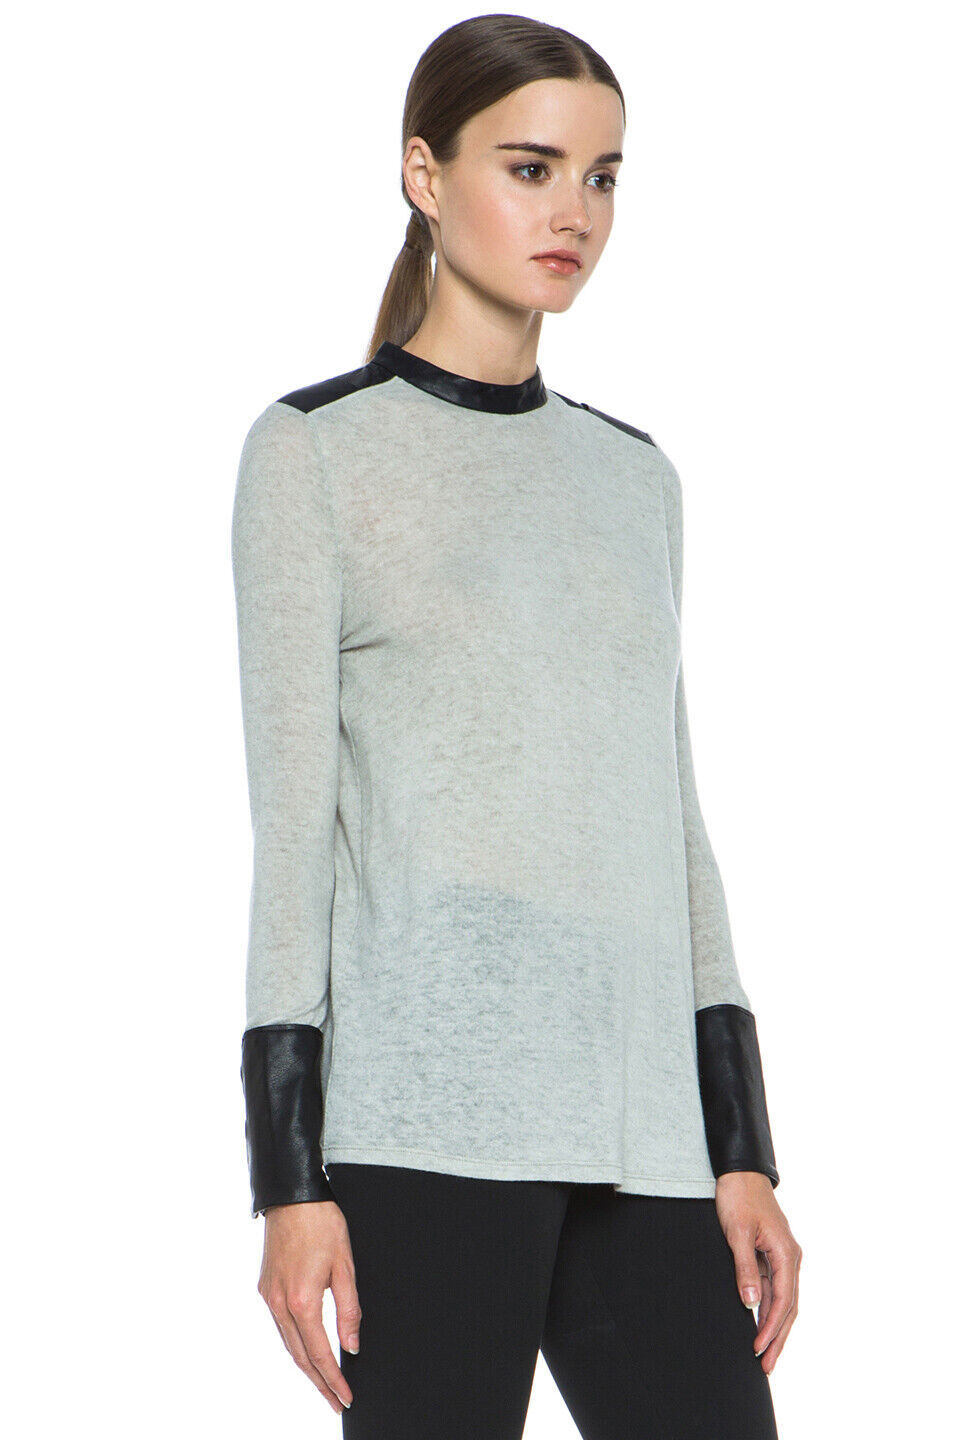 Primary image for NWT $480 Helmut Lang Black "Angora Cozy" Sweater Mute Black Leather Trim sz P XS